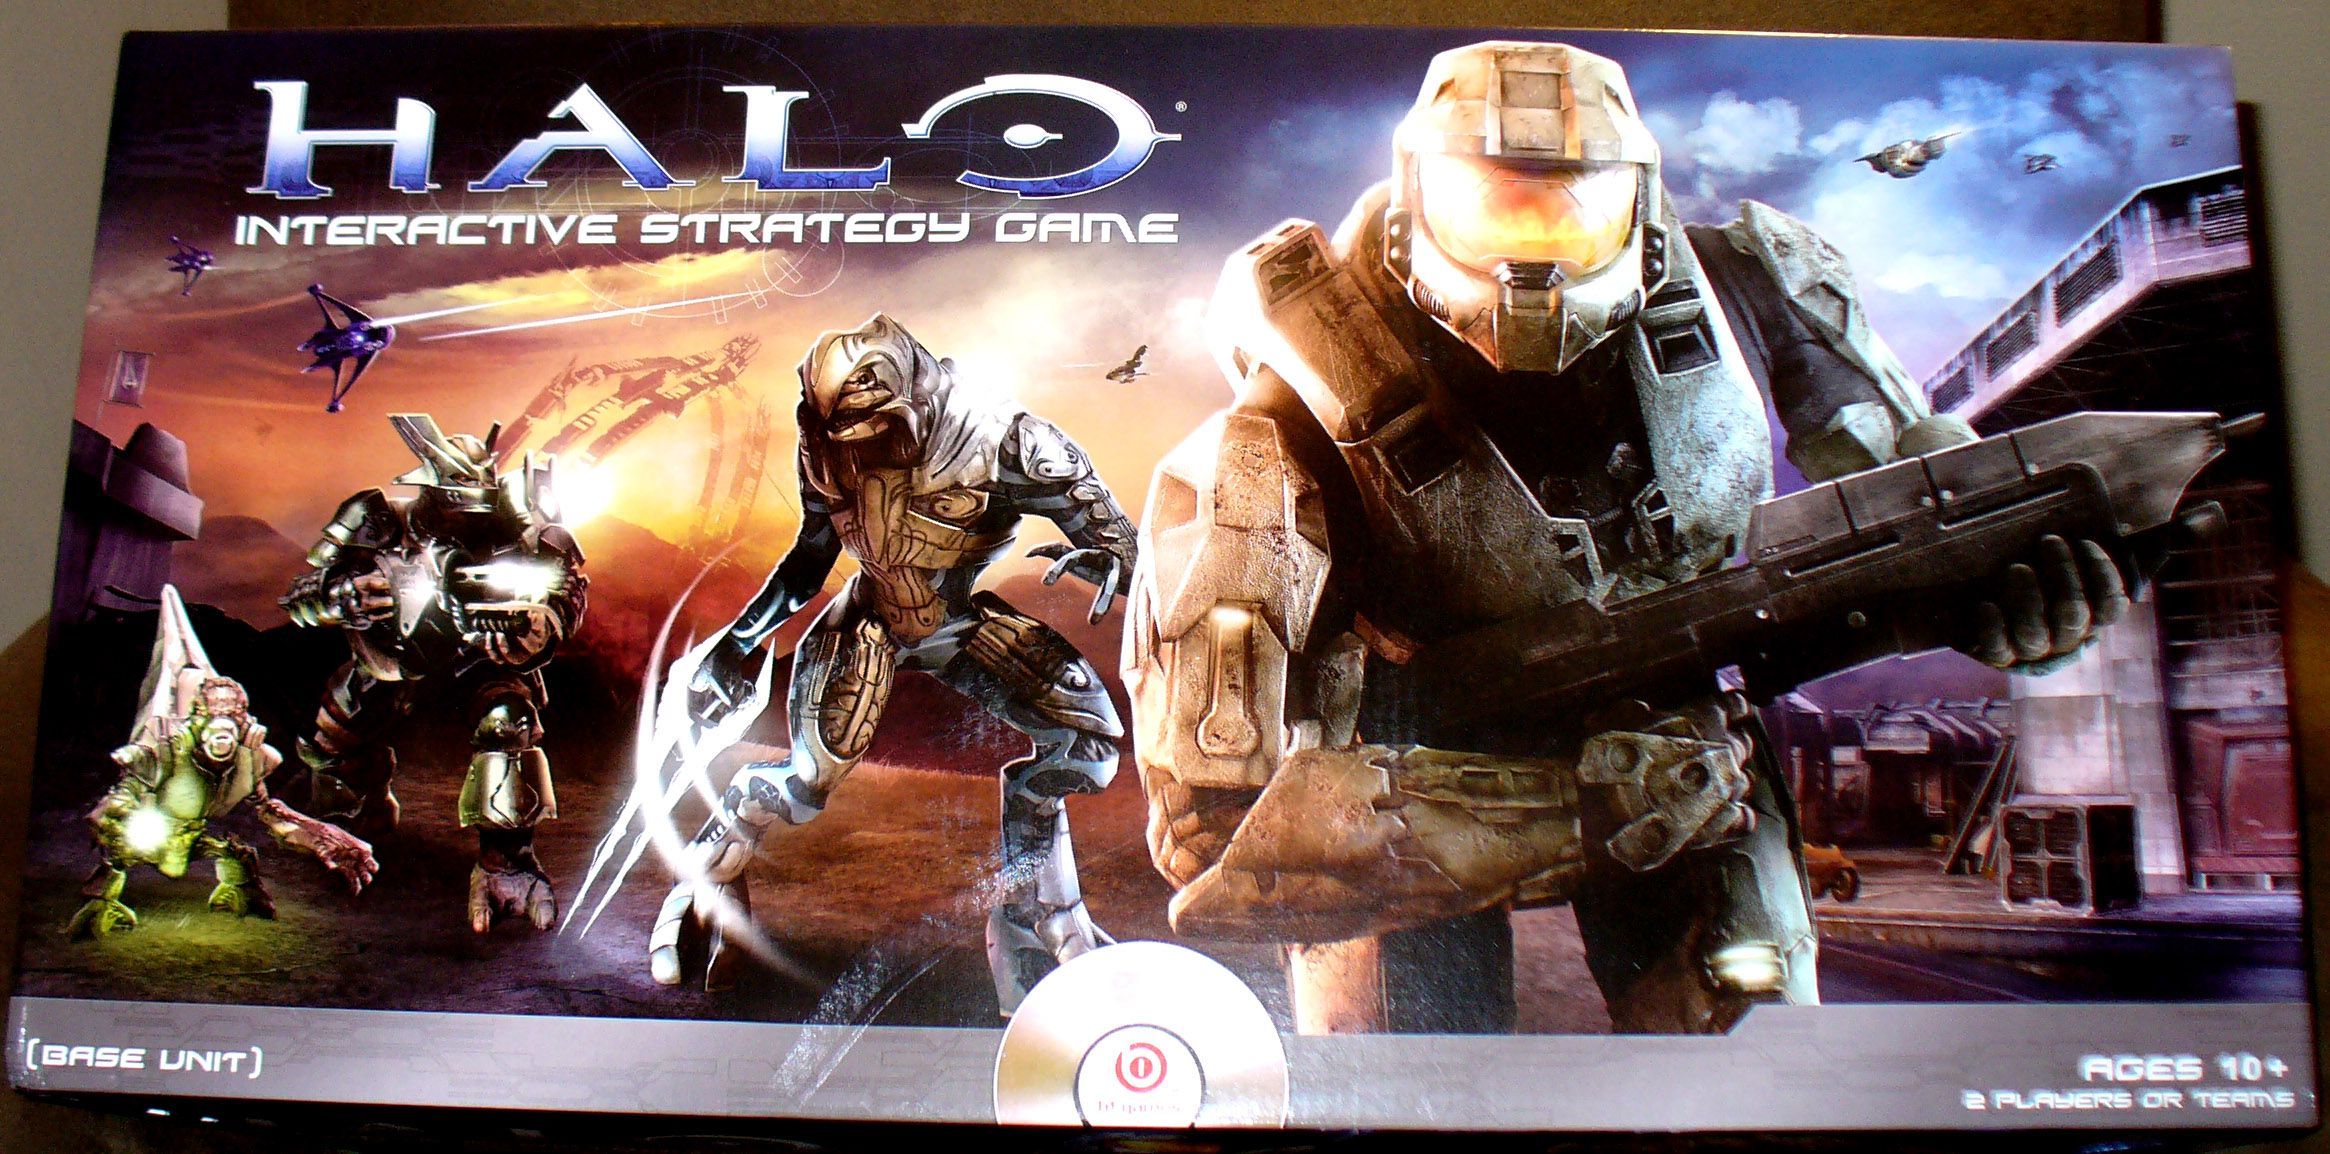 Halo Interactive Strategy Game